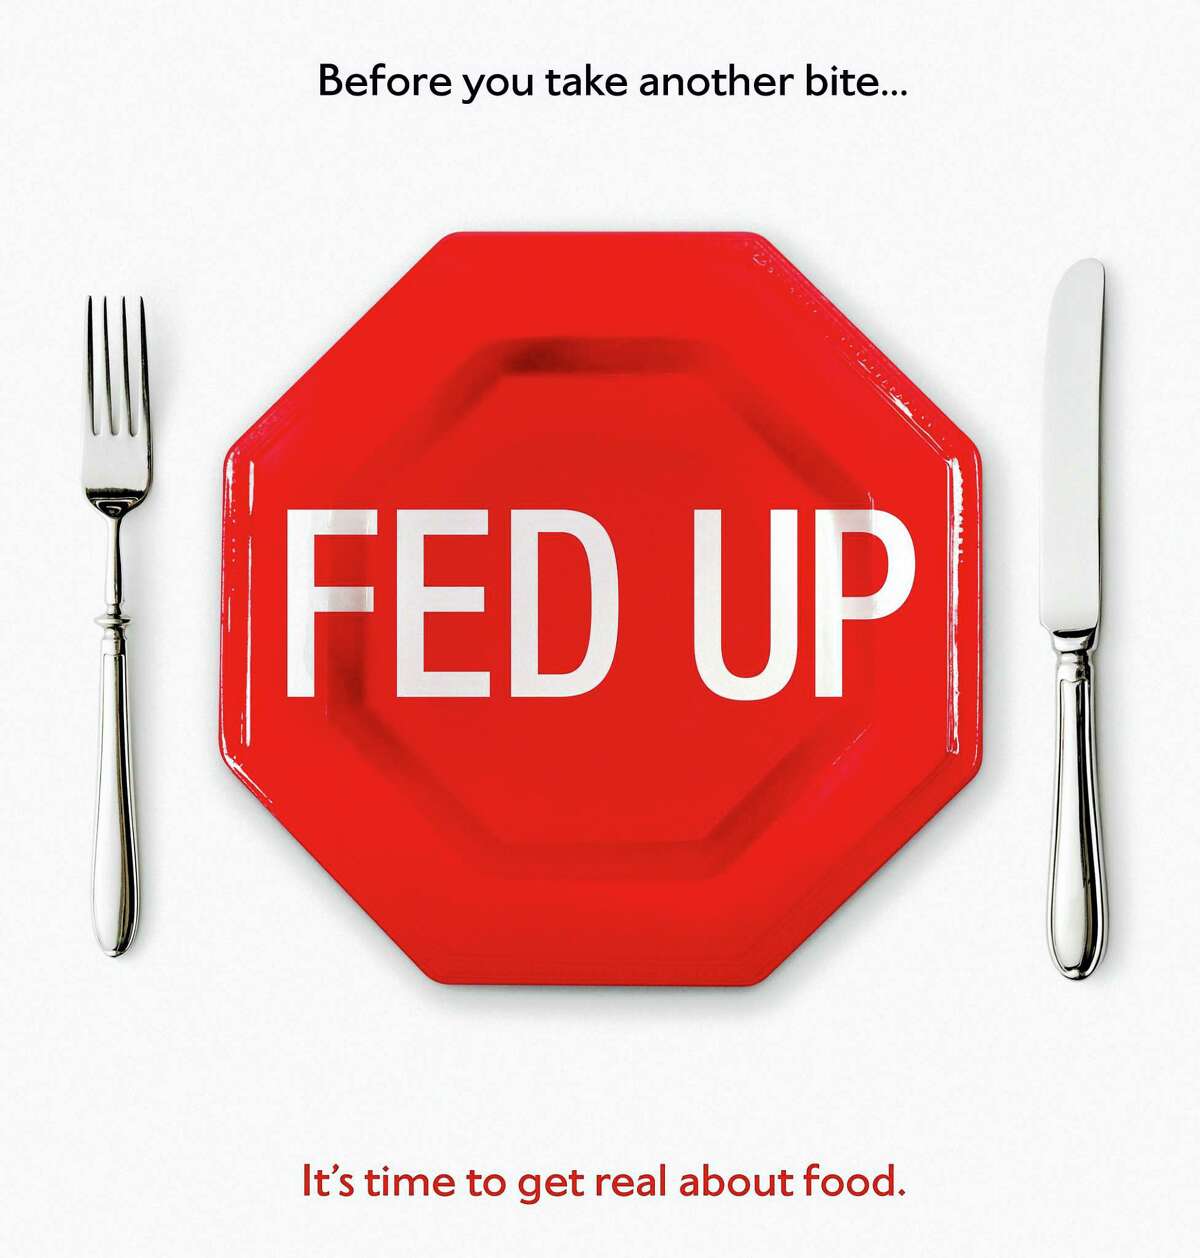 A movie poster for the film "Fed Up."